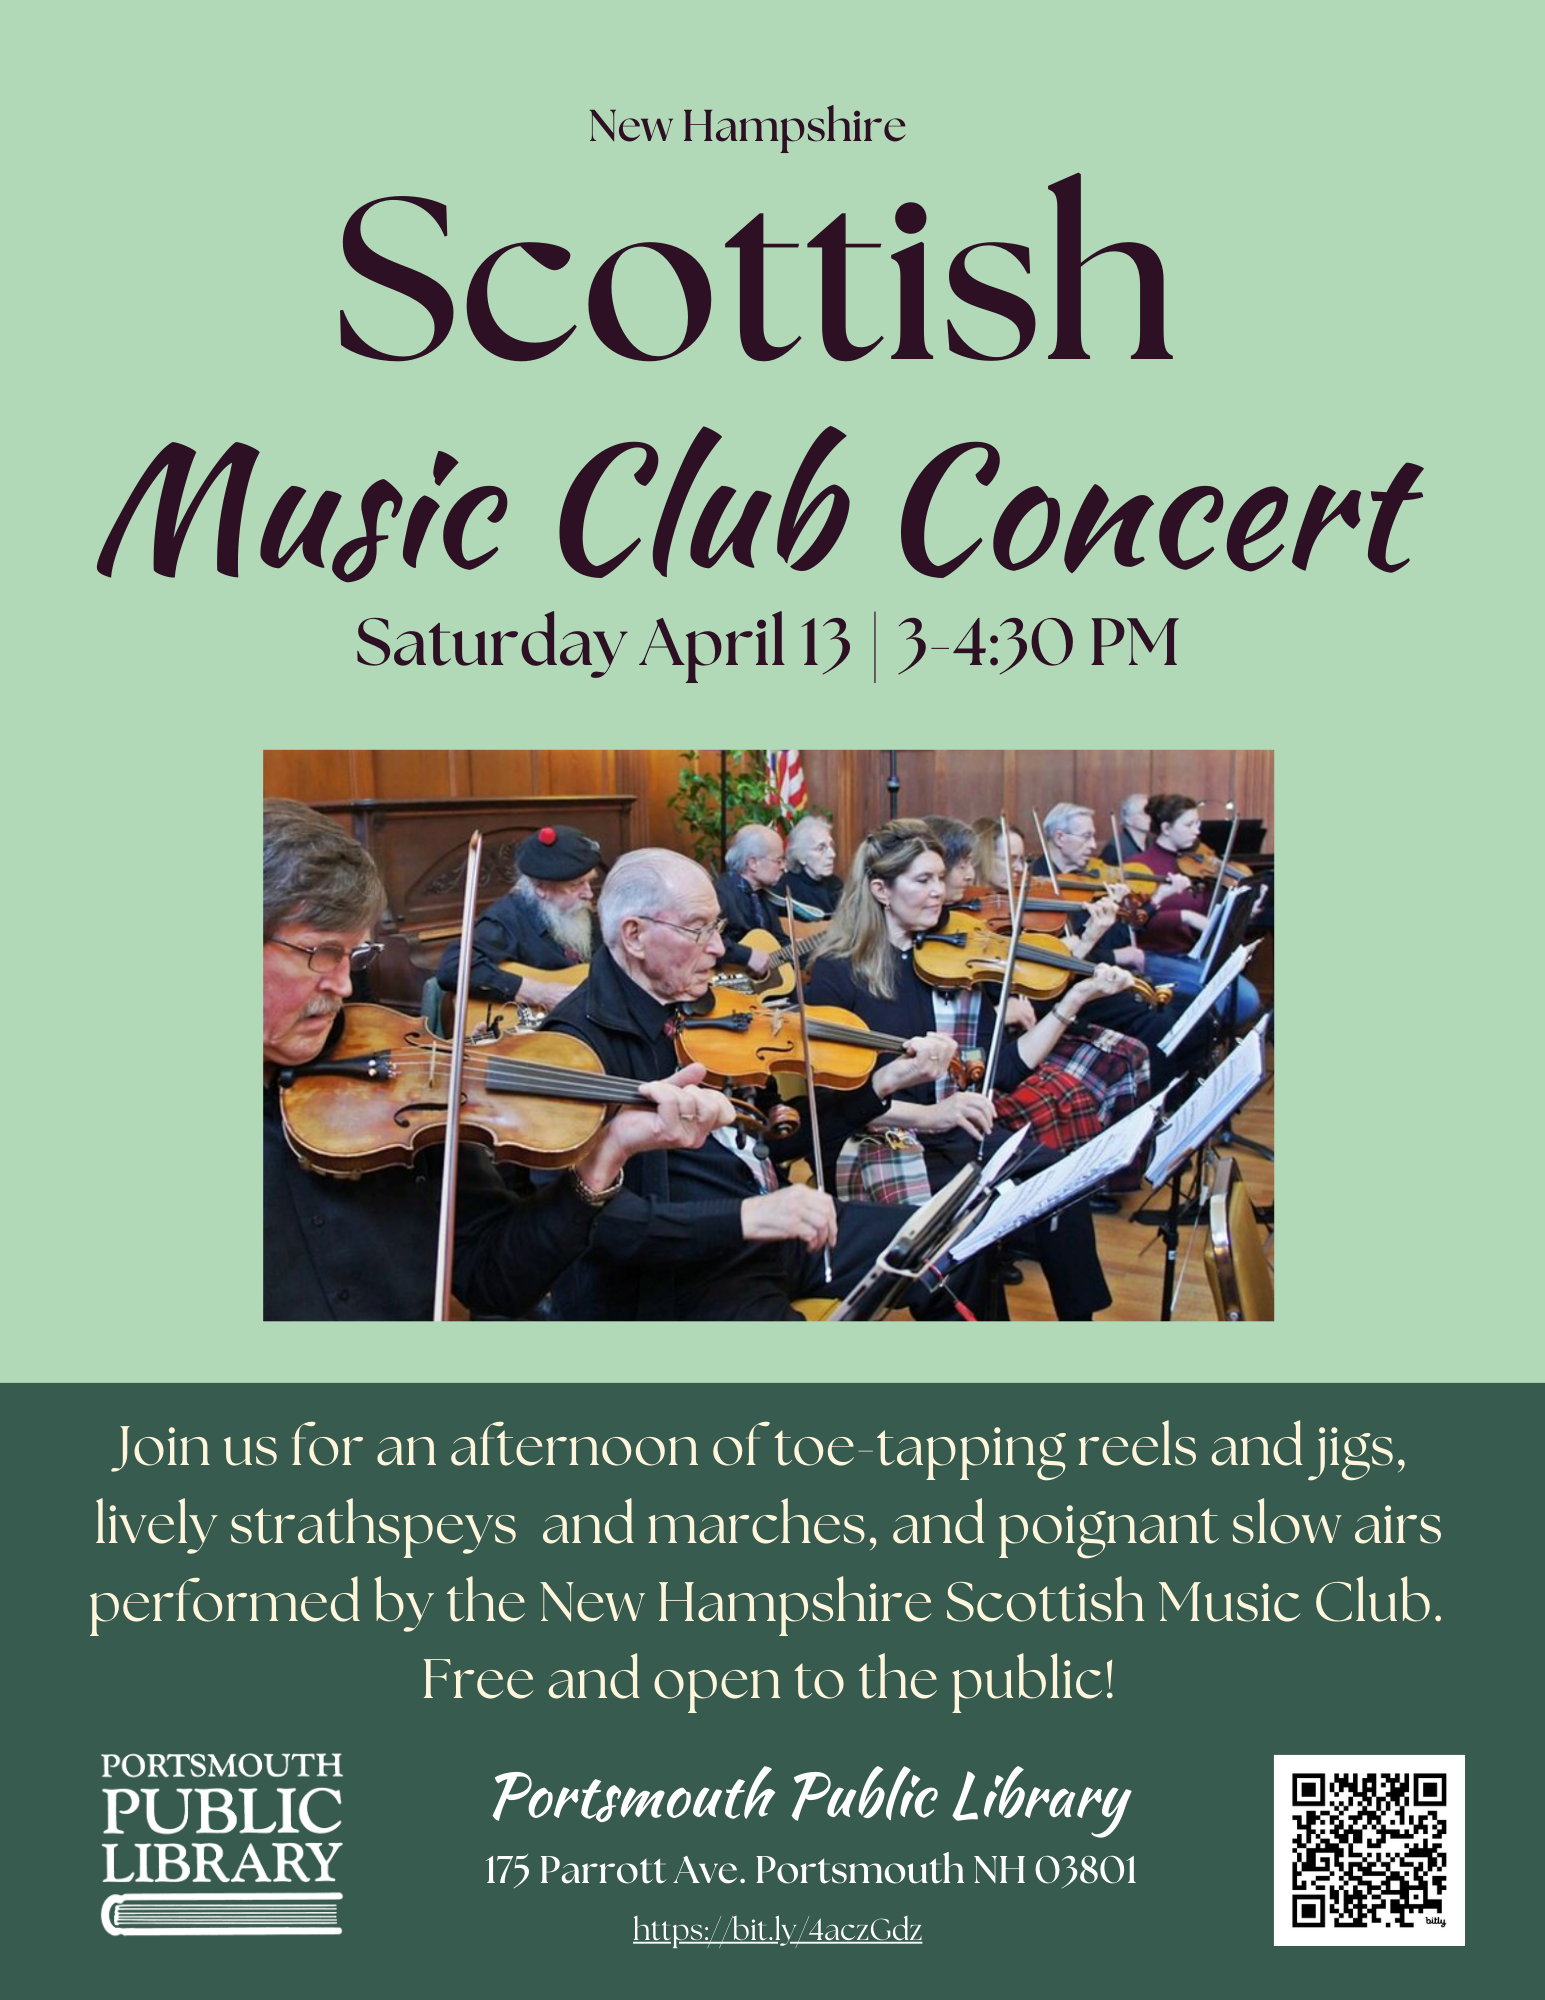 Scottish Music Club Concert, Musicians seated with instruments